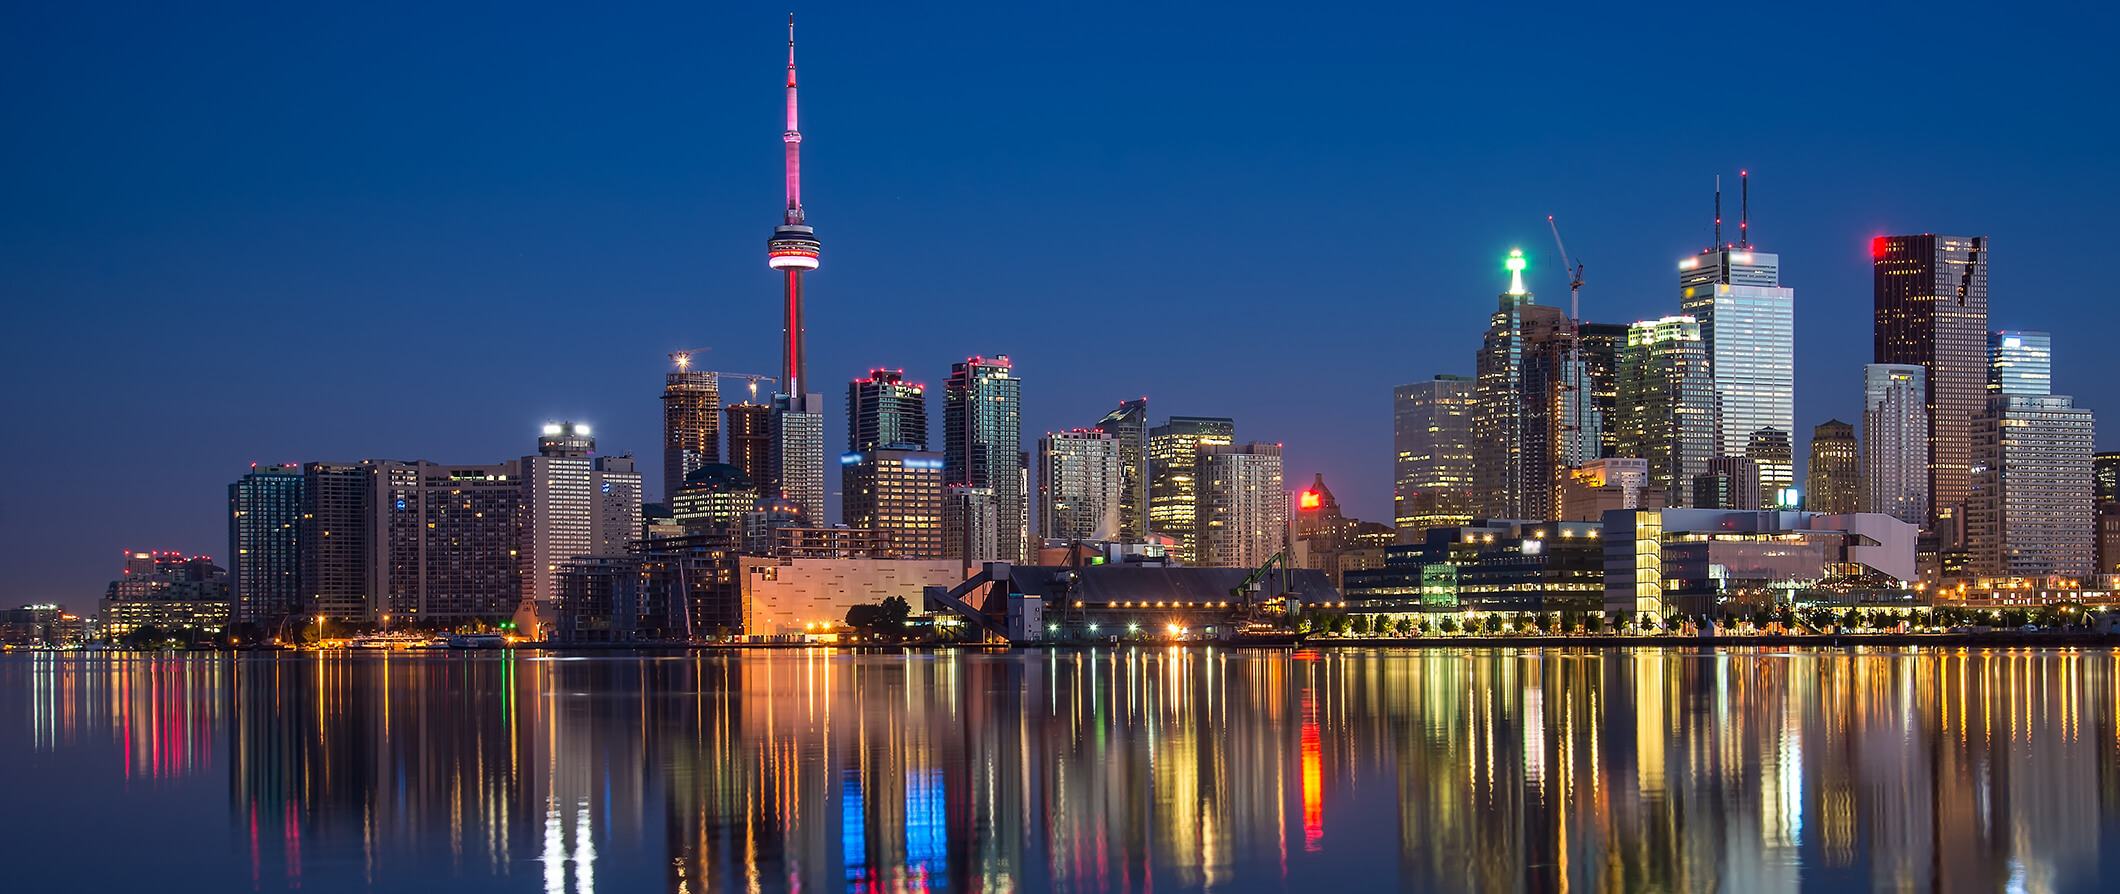 view of Toronto lit up at night with lights reflecting in the water